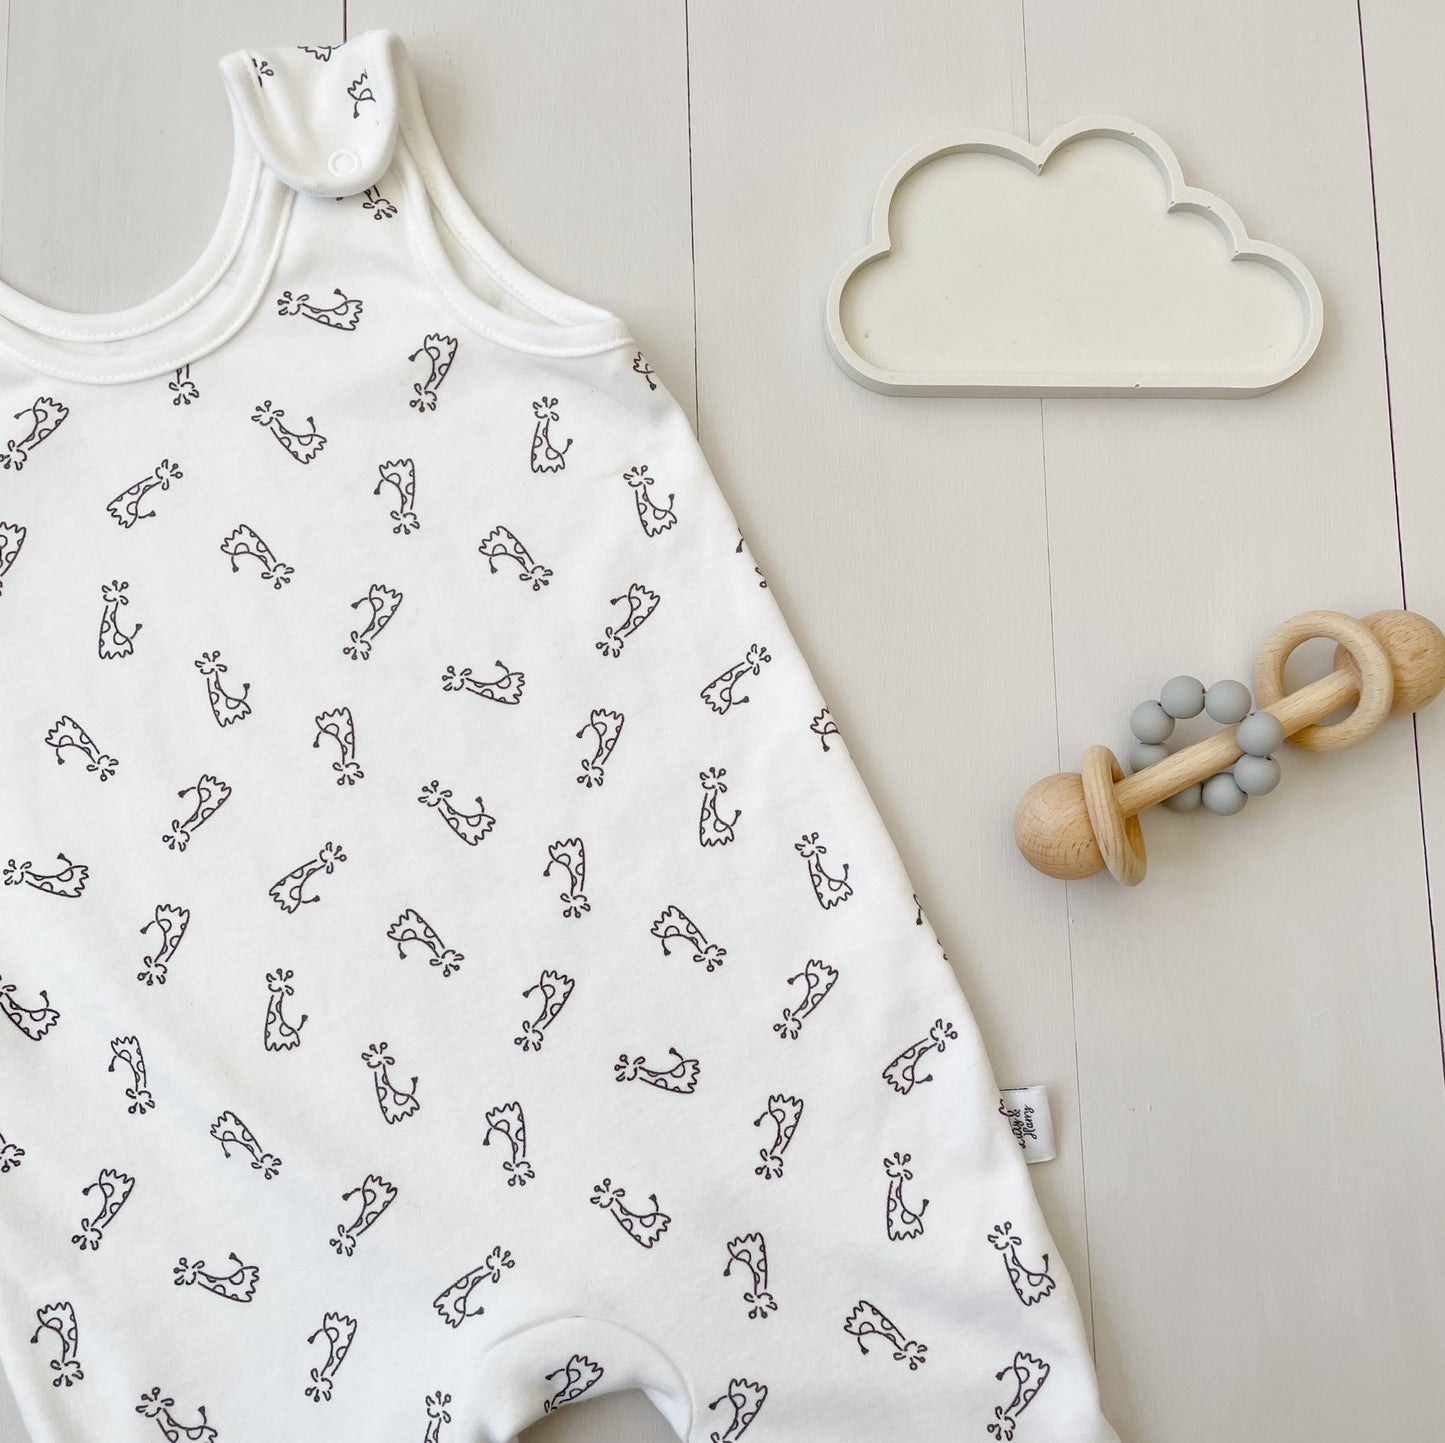 white romper dungarees for baby with giraffe prints - super soft 100% organic cotton - uk made - London business - gift box availabe